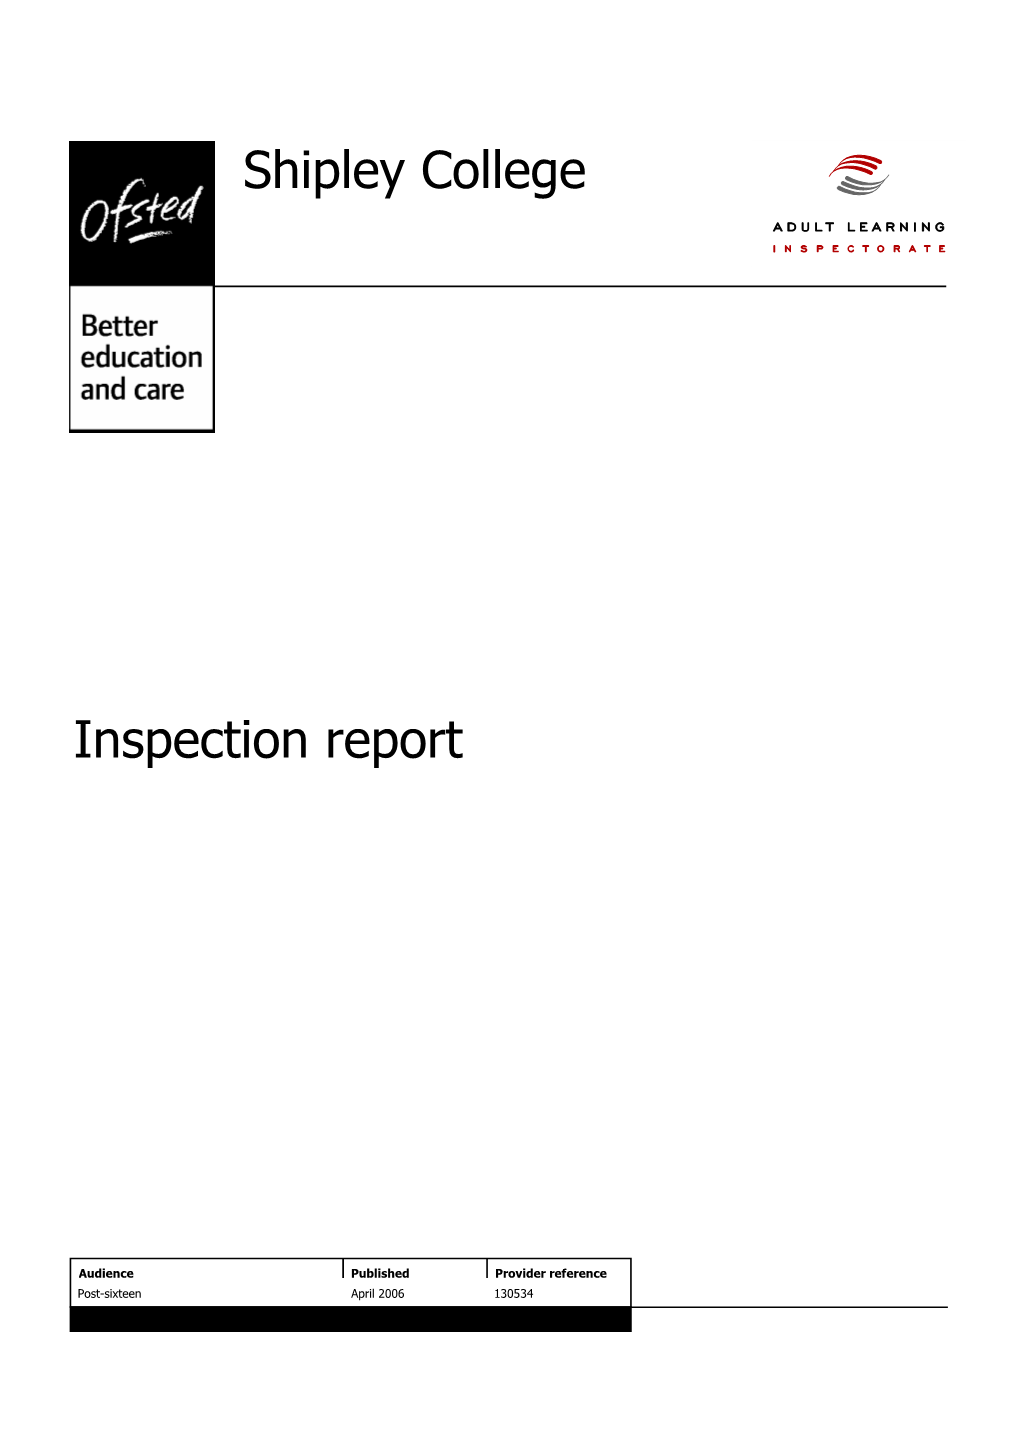 Shipley College Inspection Report